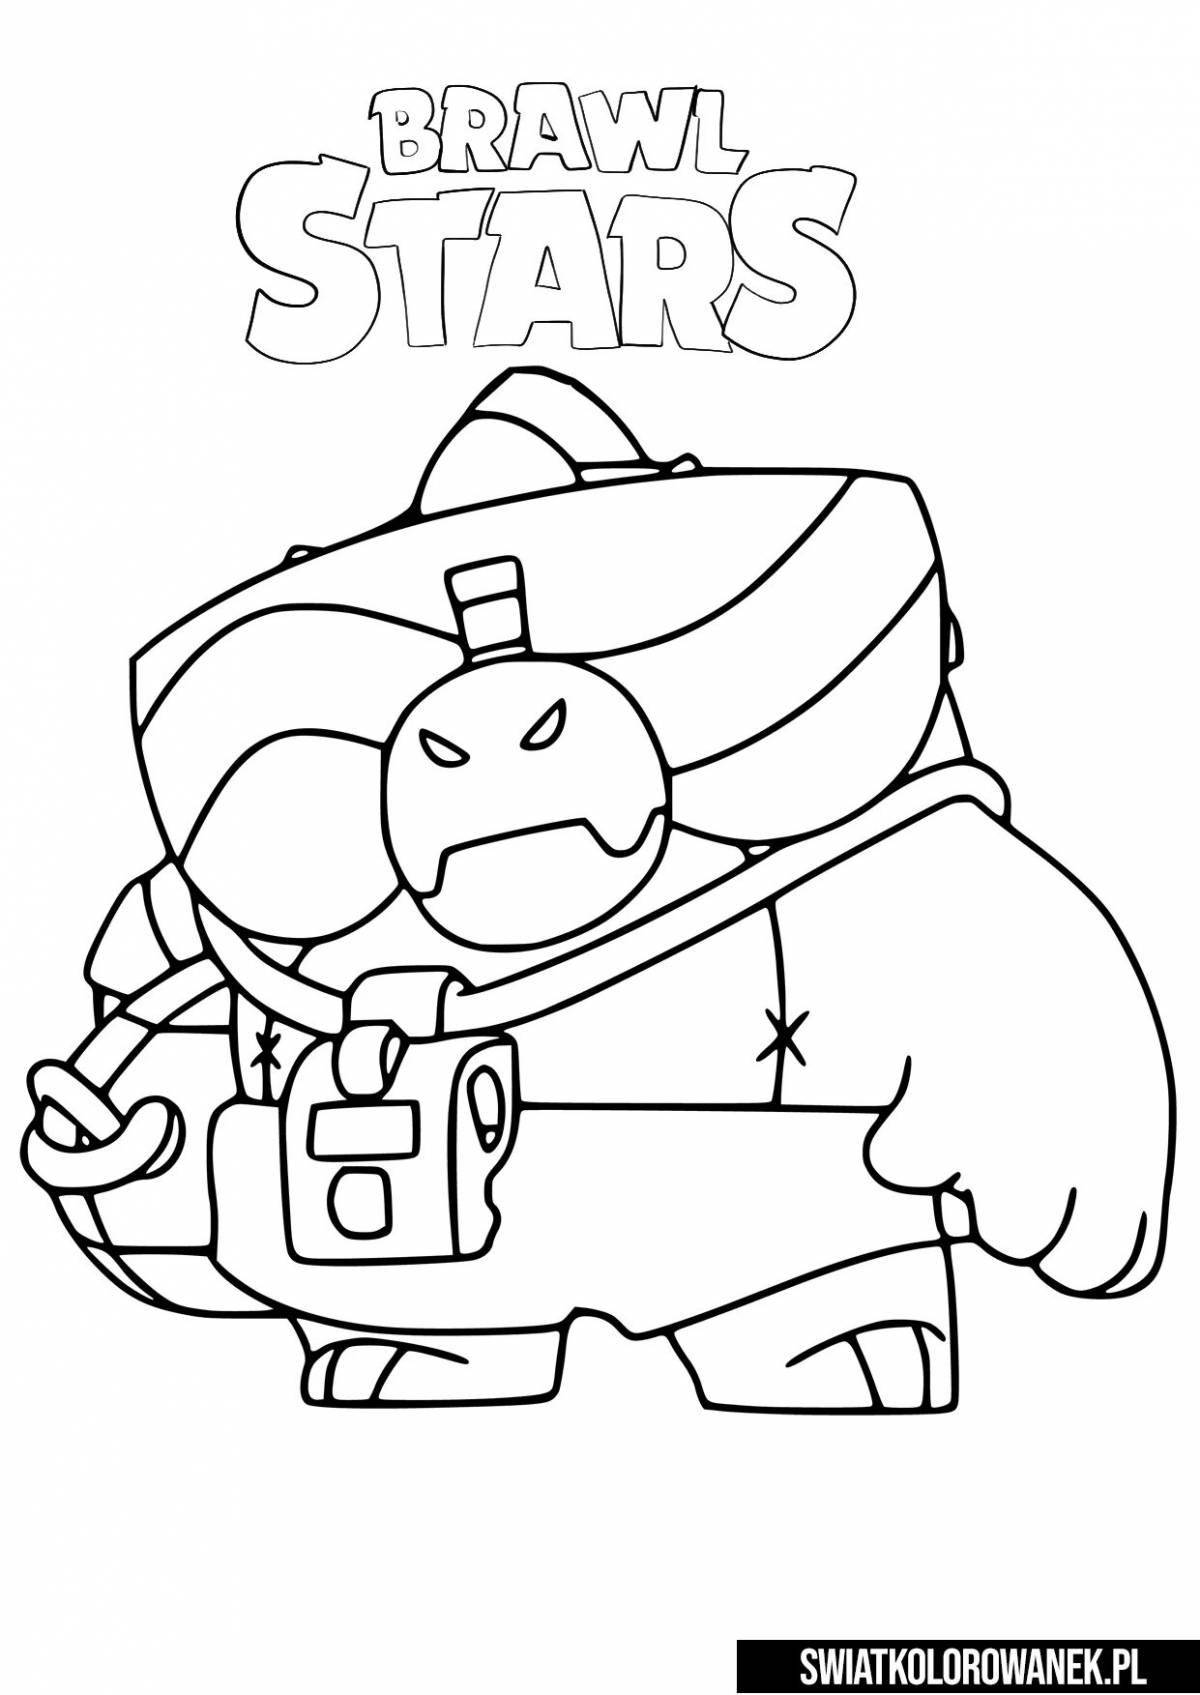 Brawl stars glossy coloring book for boys